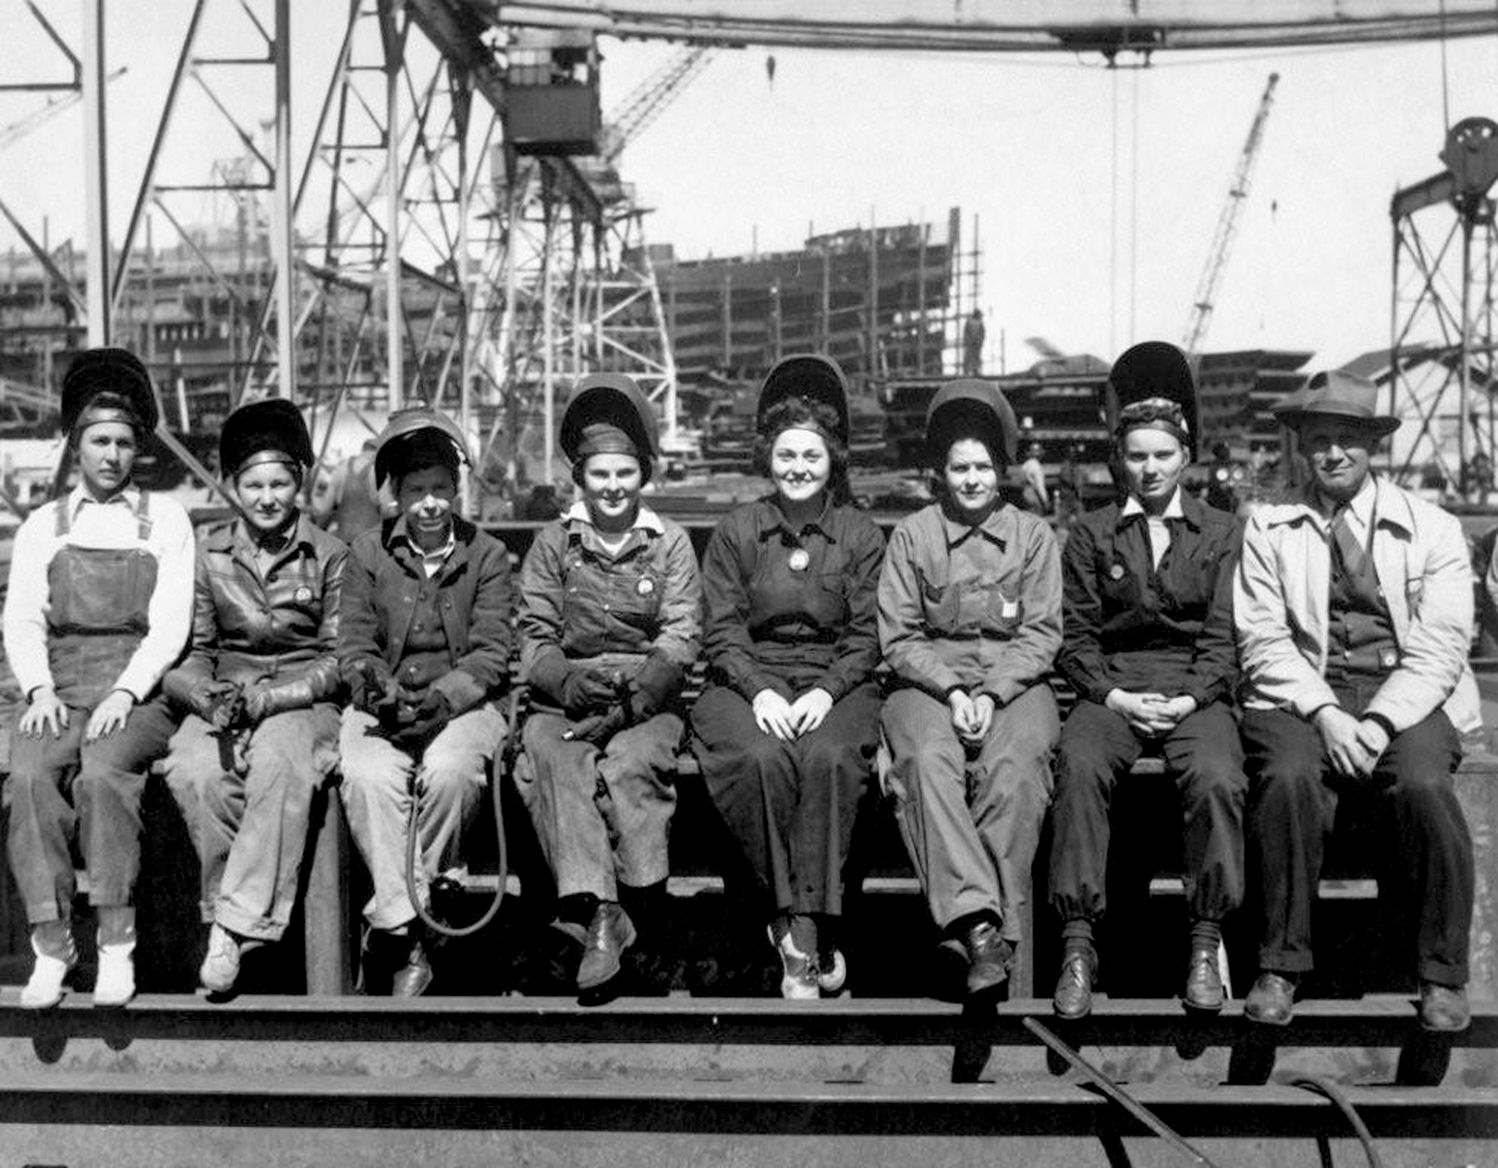 Women working in traditionally all-male occupations were a popular subject for photographers. Here a female welding crew and their male supervisor pose at an unidentified American shipyard.